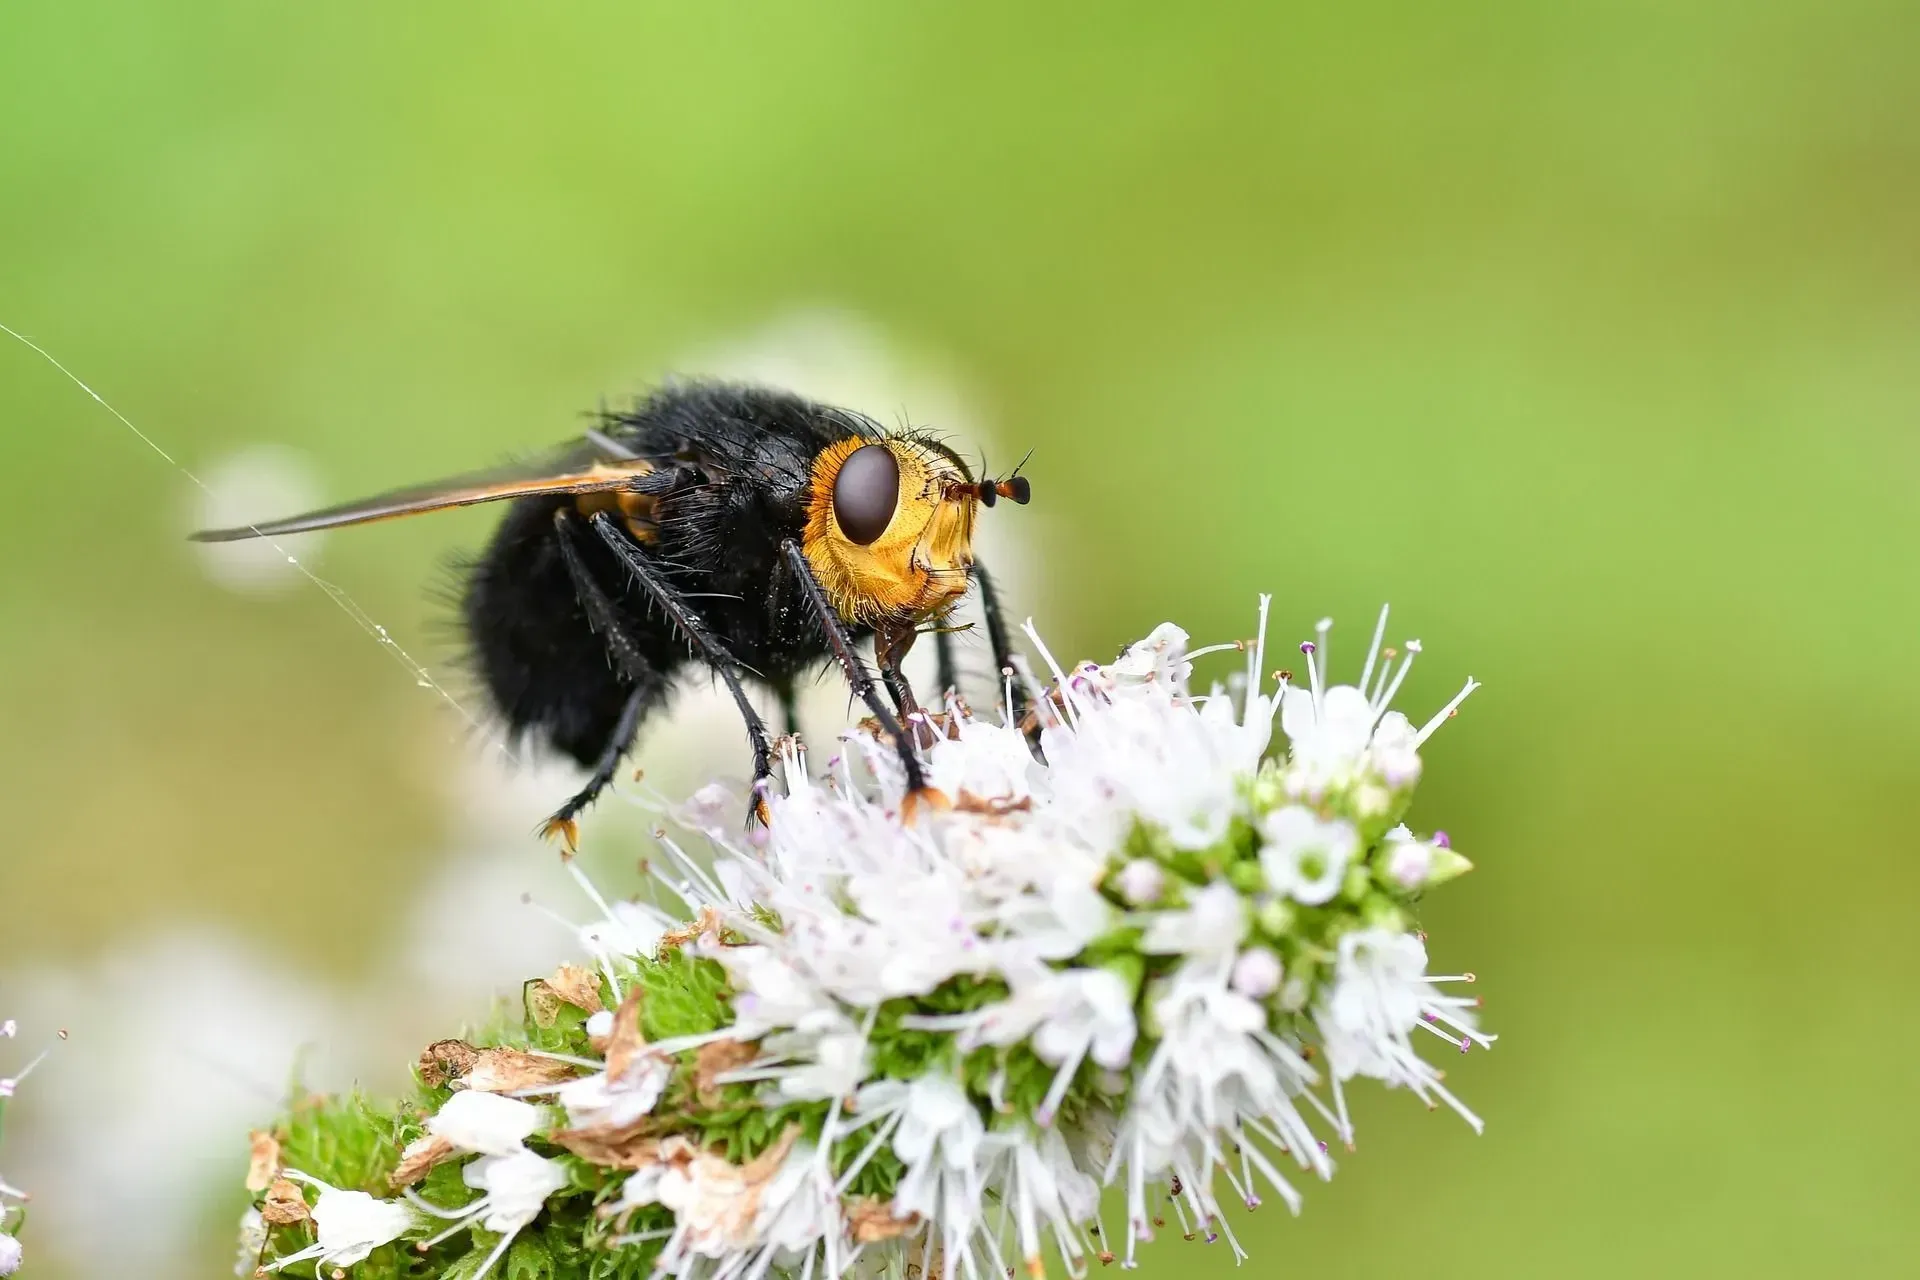 Tachina grossa flies have ample stiff and straight black hair on the abdomen and thorax.